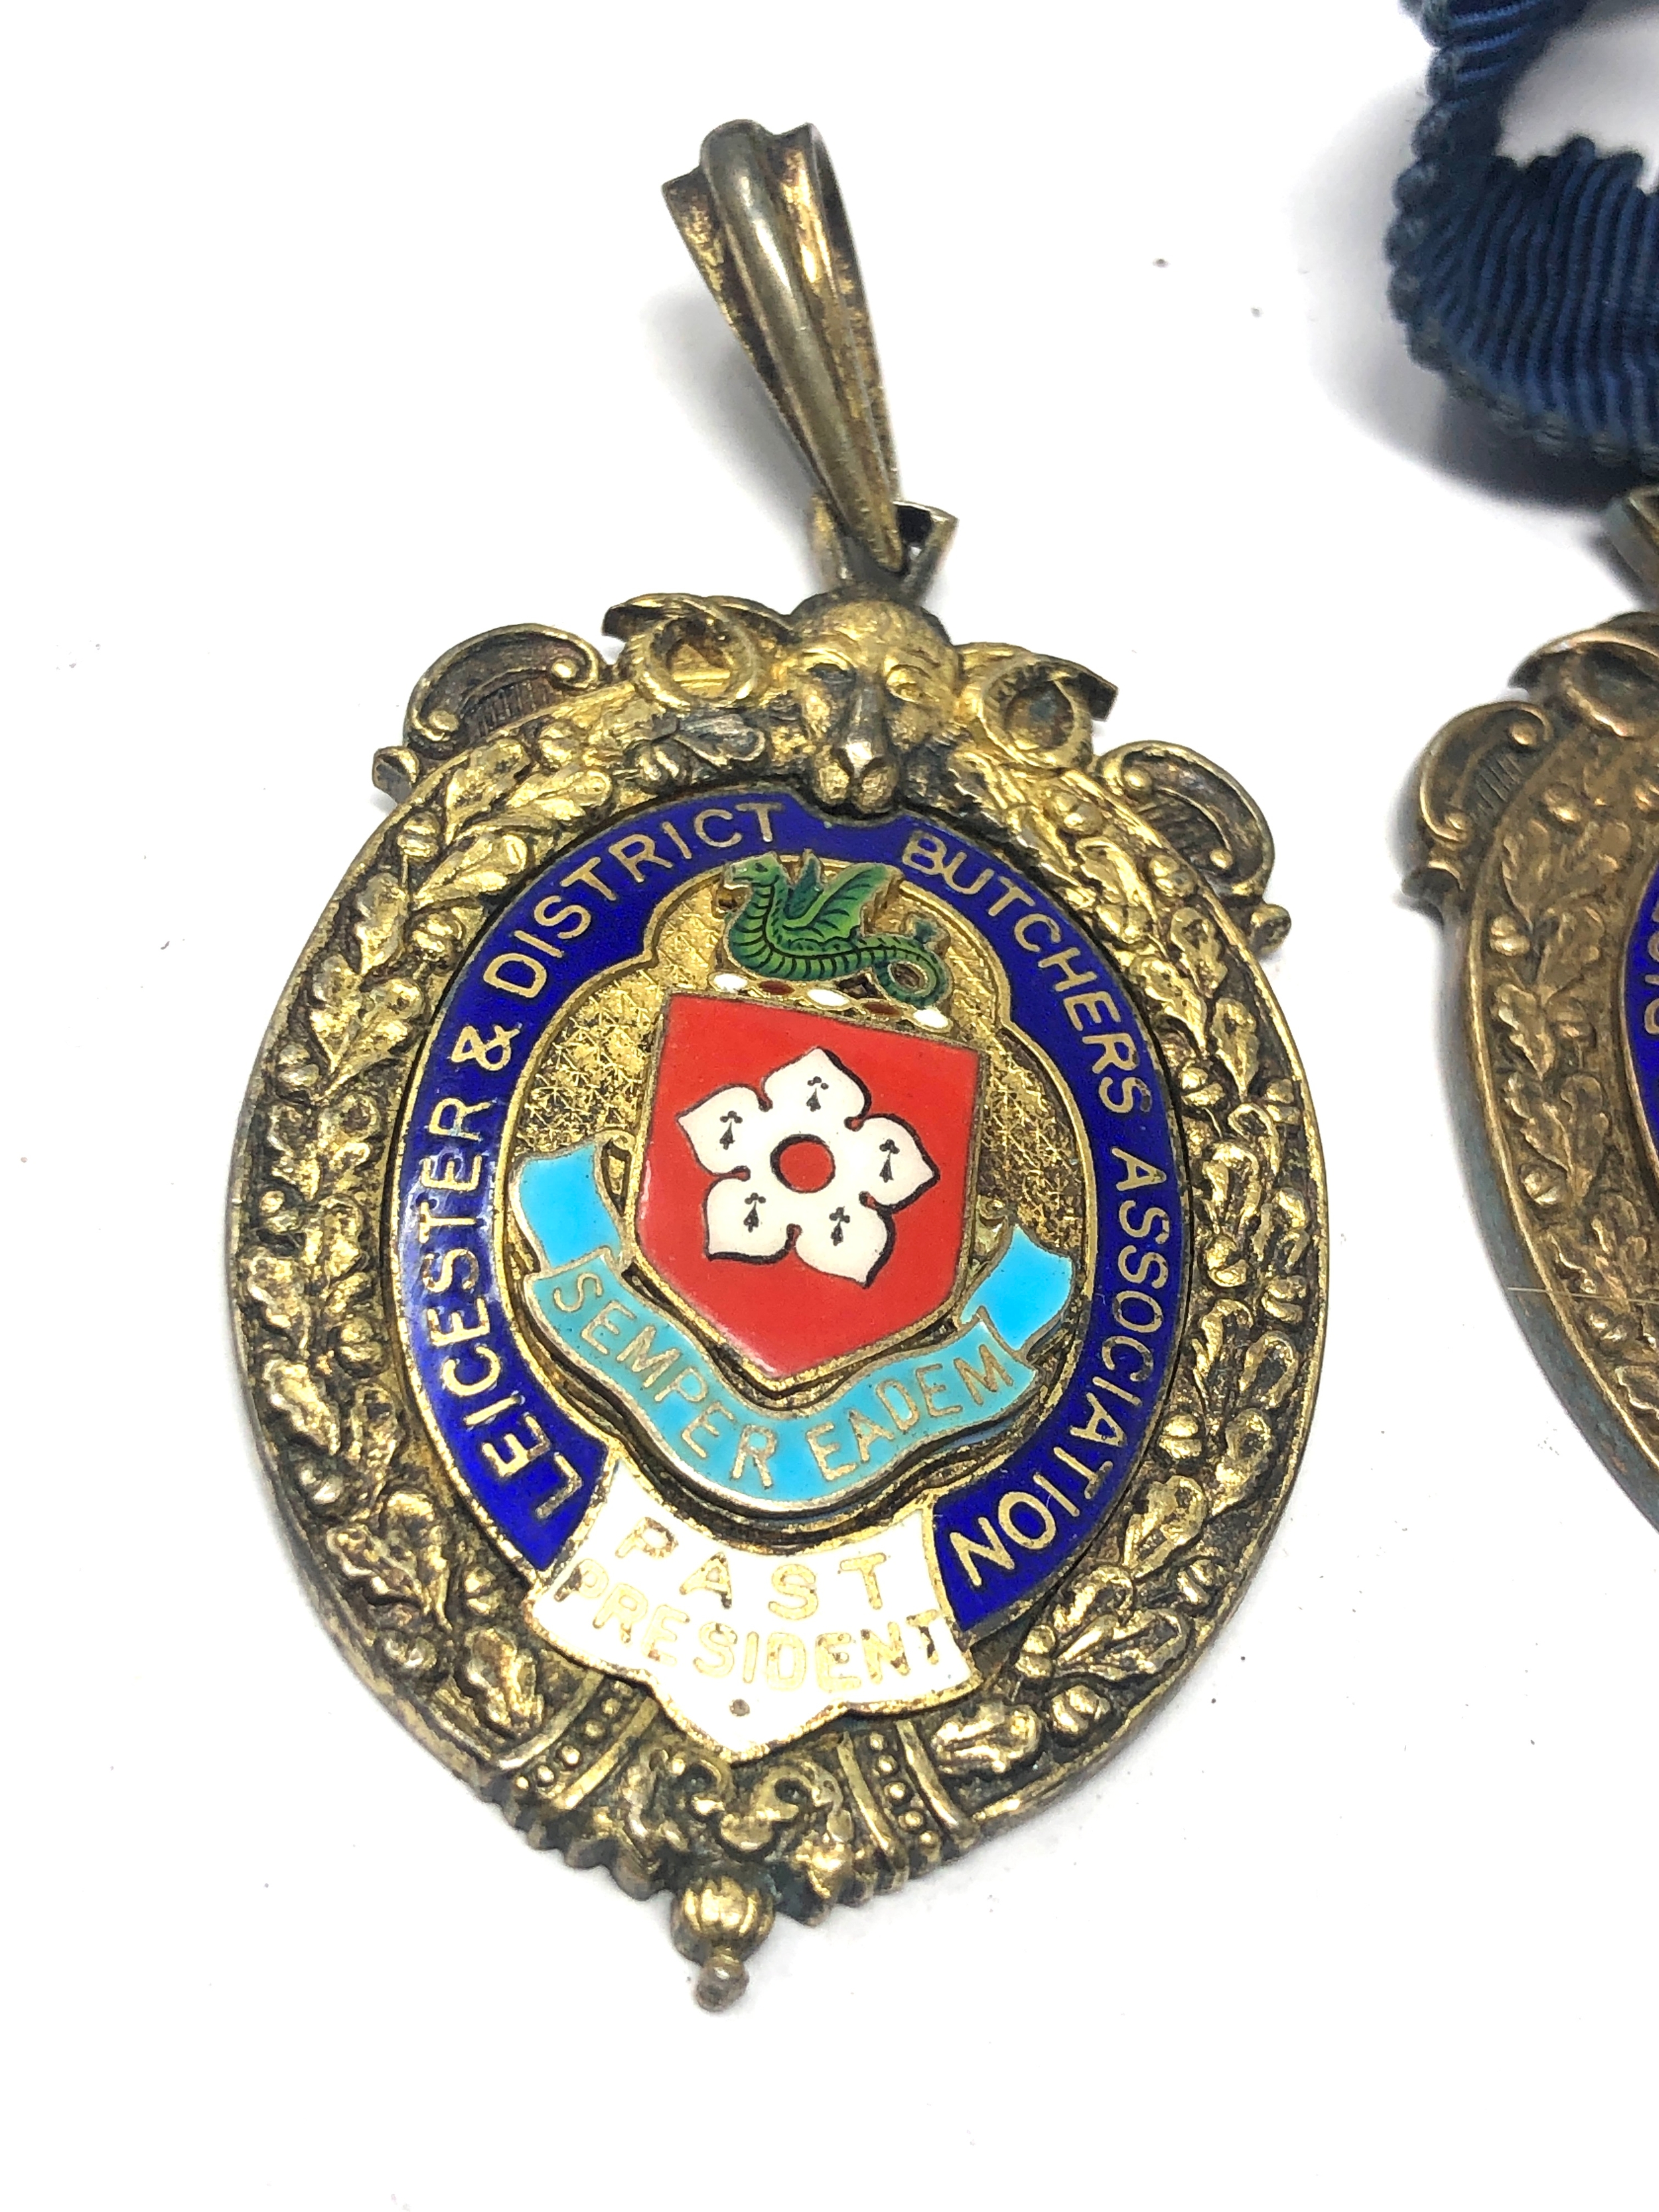 2 hallmarked silver leicestershire butchers medals - Image 2 of 4